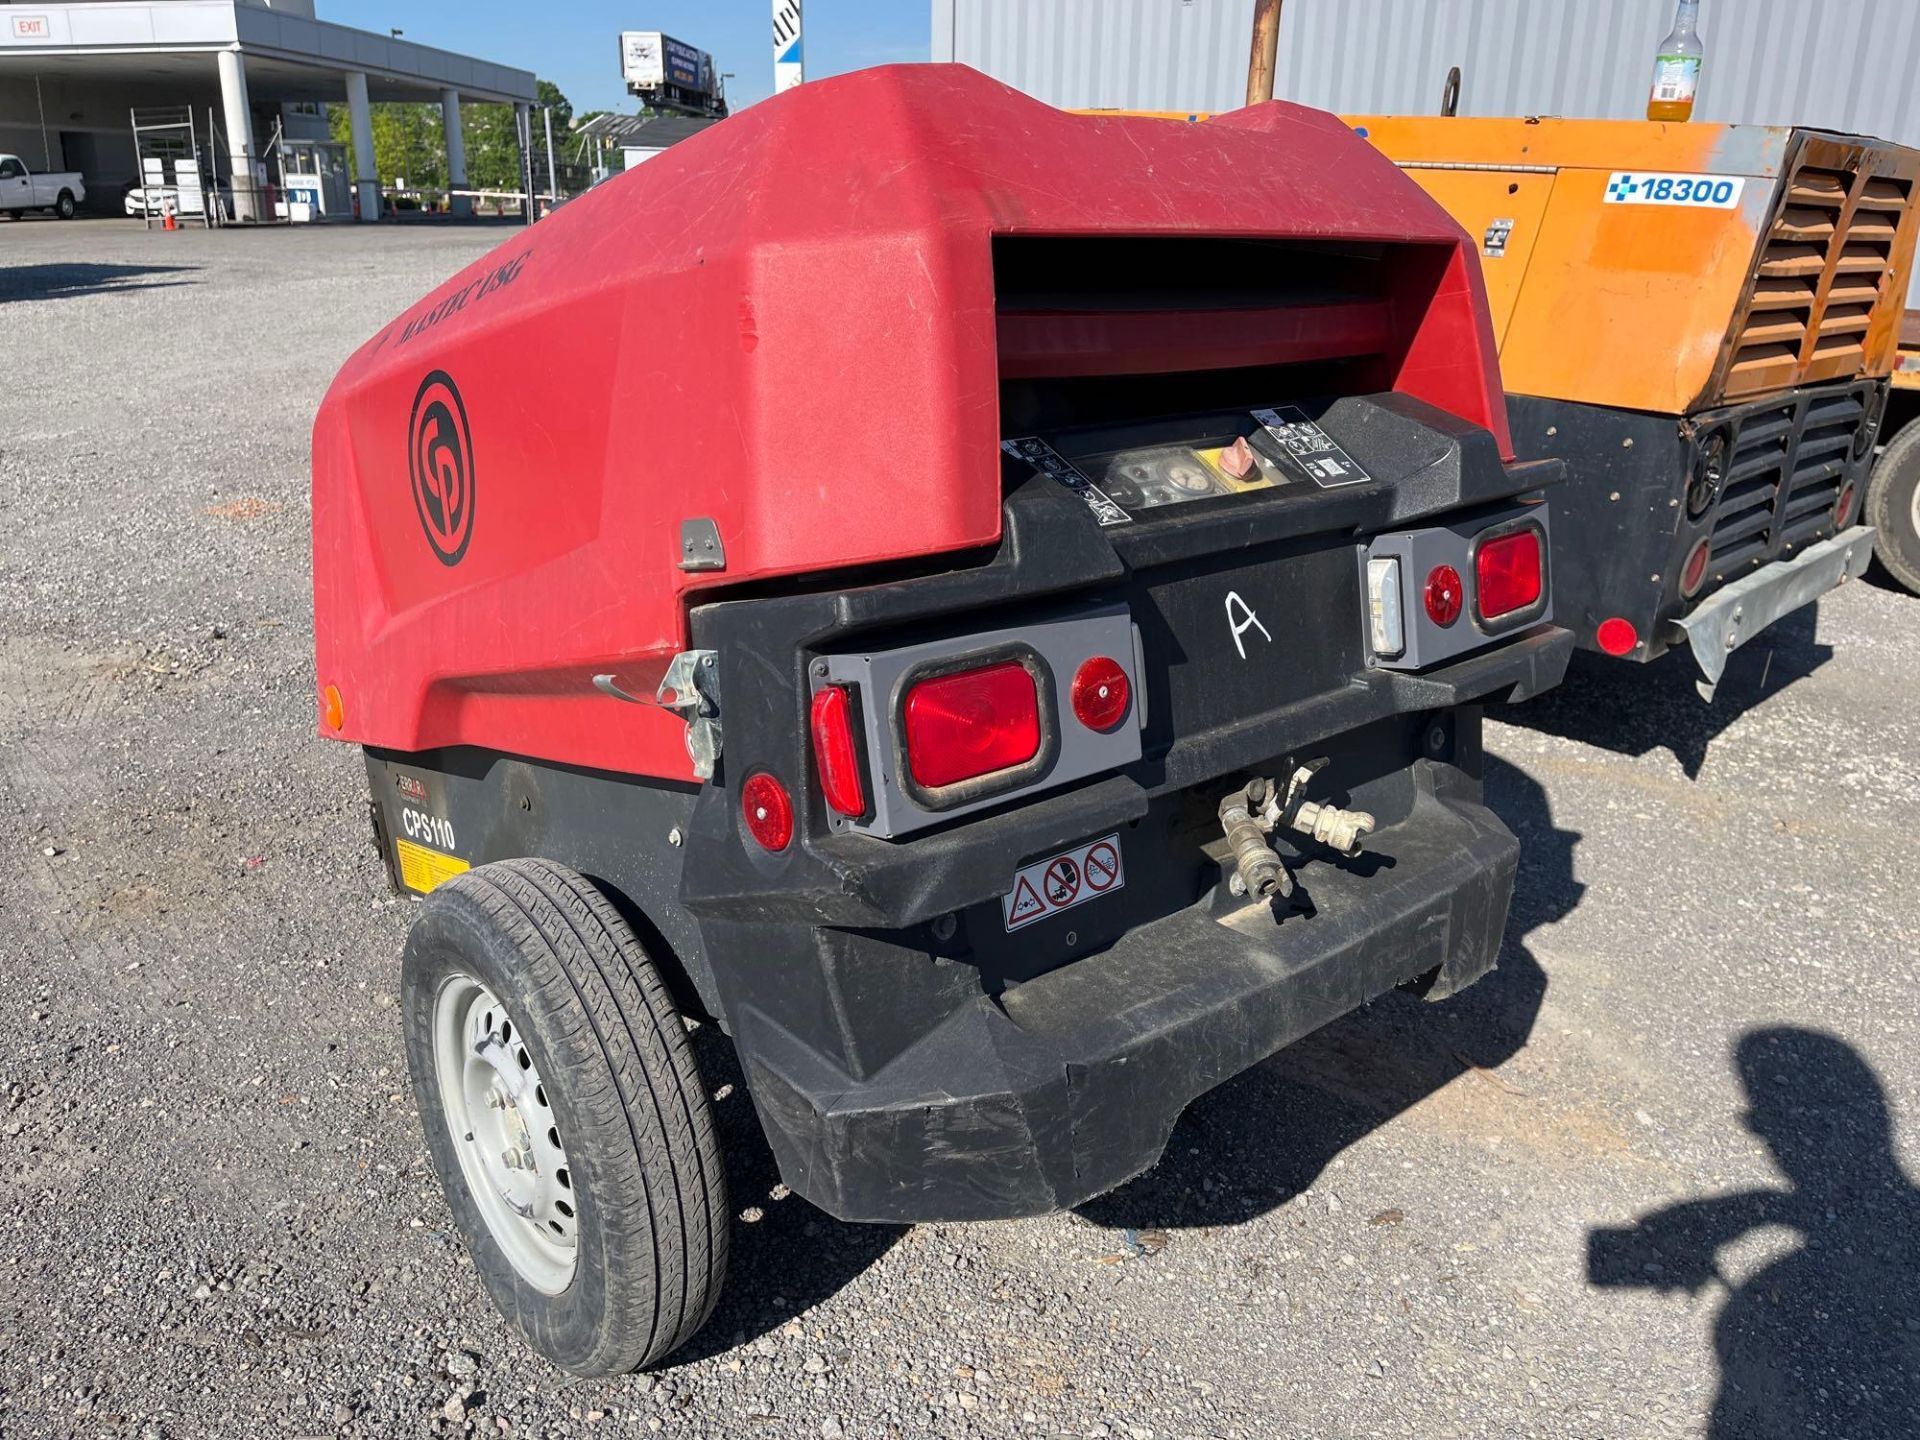 2020 CPS110 Portable Air Compressor - Image 2 of 14